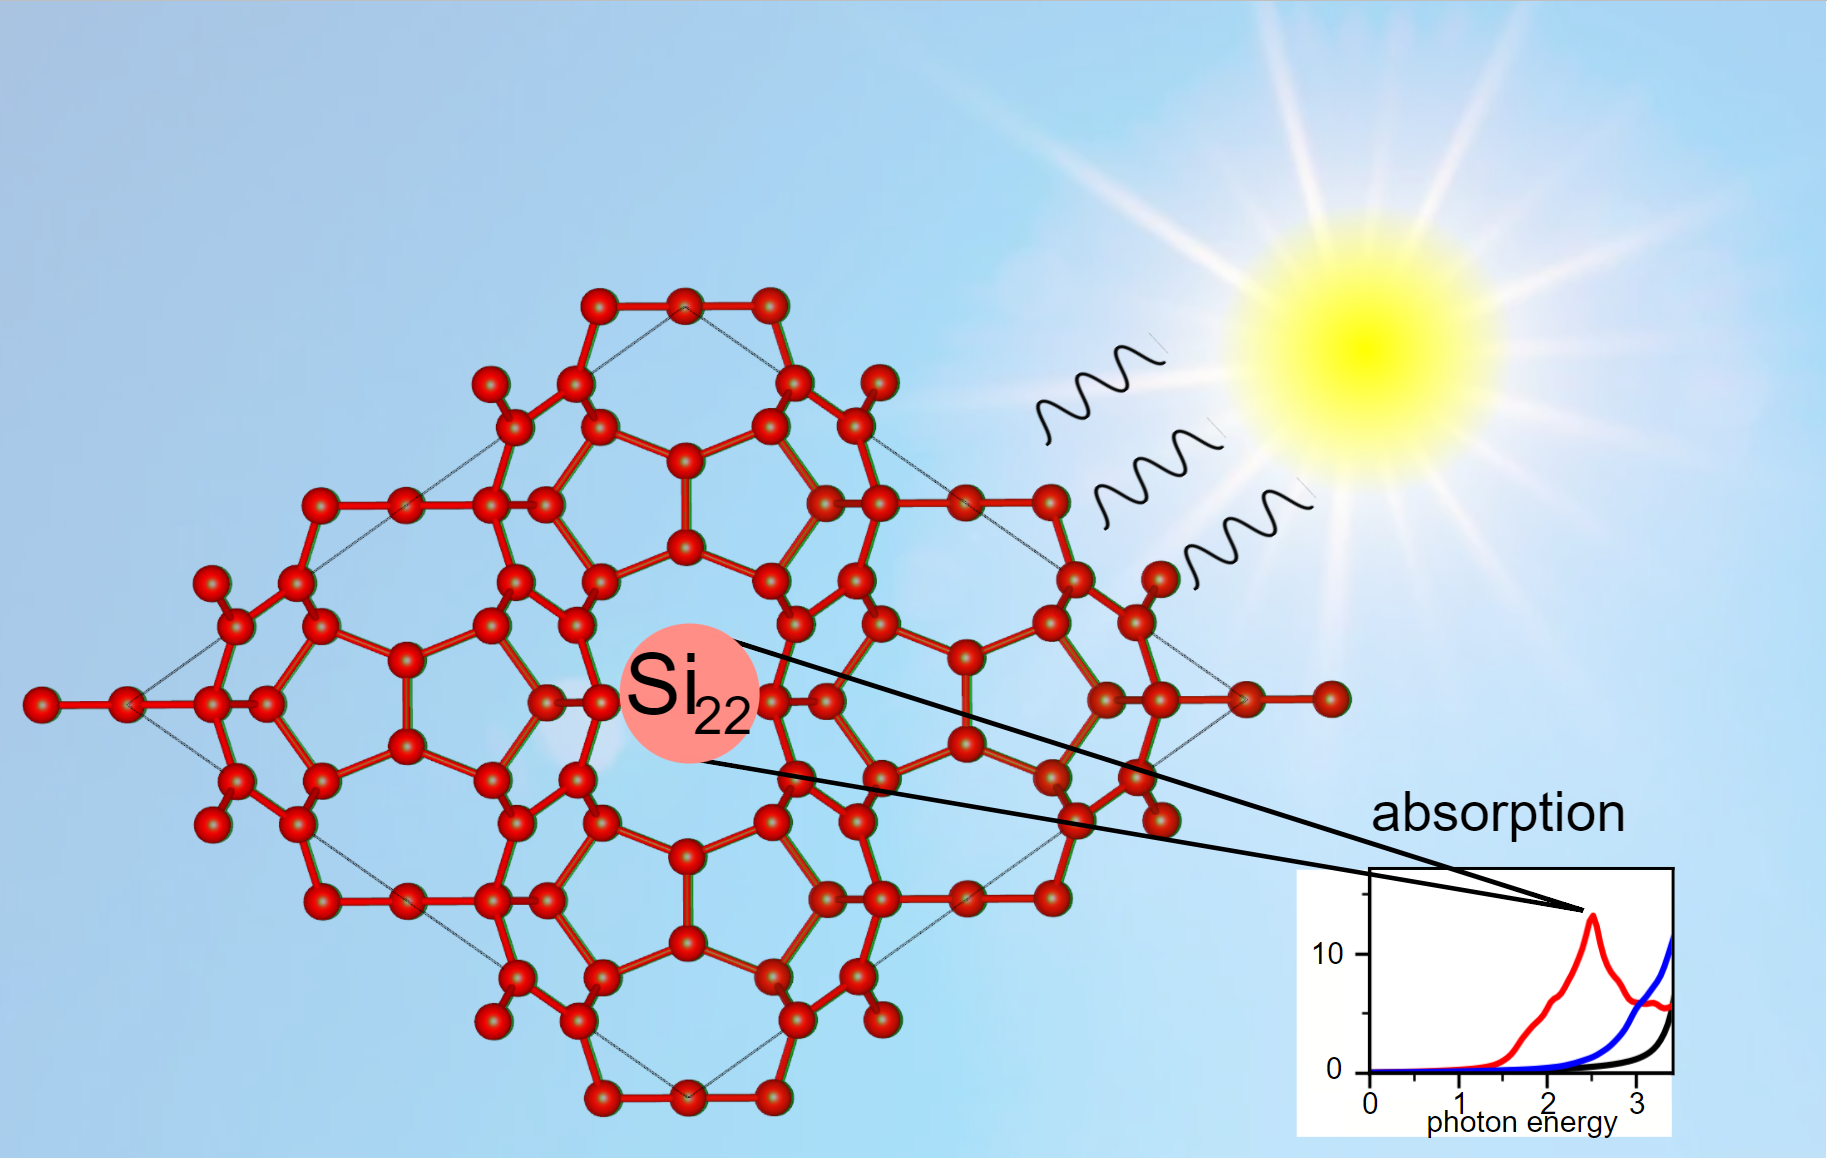 Pentagon-rich silicon allotrope Si22 is predicted to surpass the sunlight absorption capability of traditional silicon. Clean energy production would benefit from the integration of Si22 as the fundamental block in a next generation of solar cells.